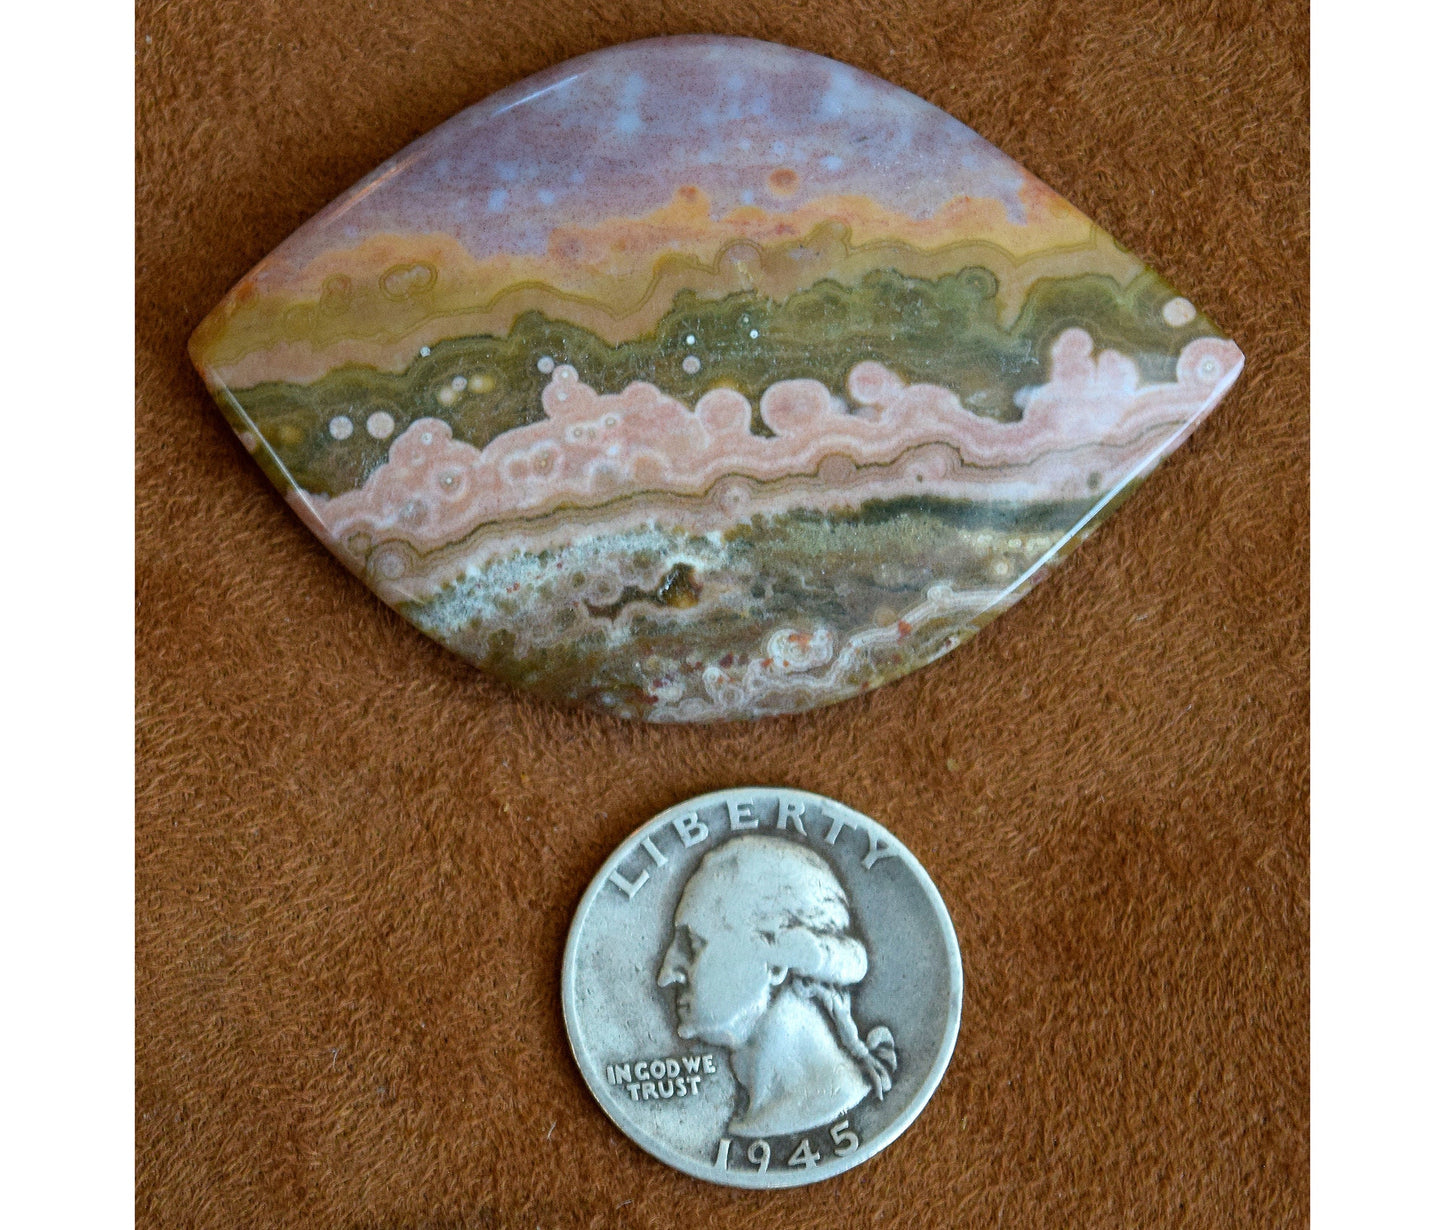 EXTREMELY RARE! HUGE Ocean Jasper collector&#39;s gem from decades ago! Stone #1 of 6